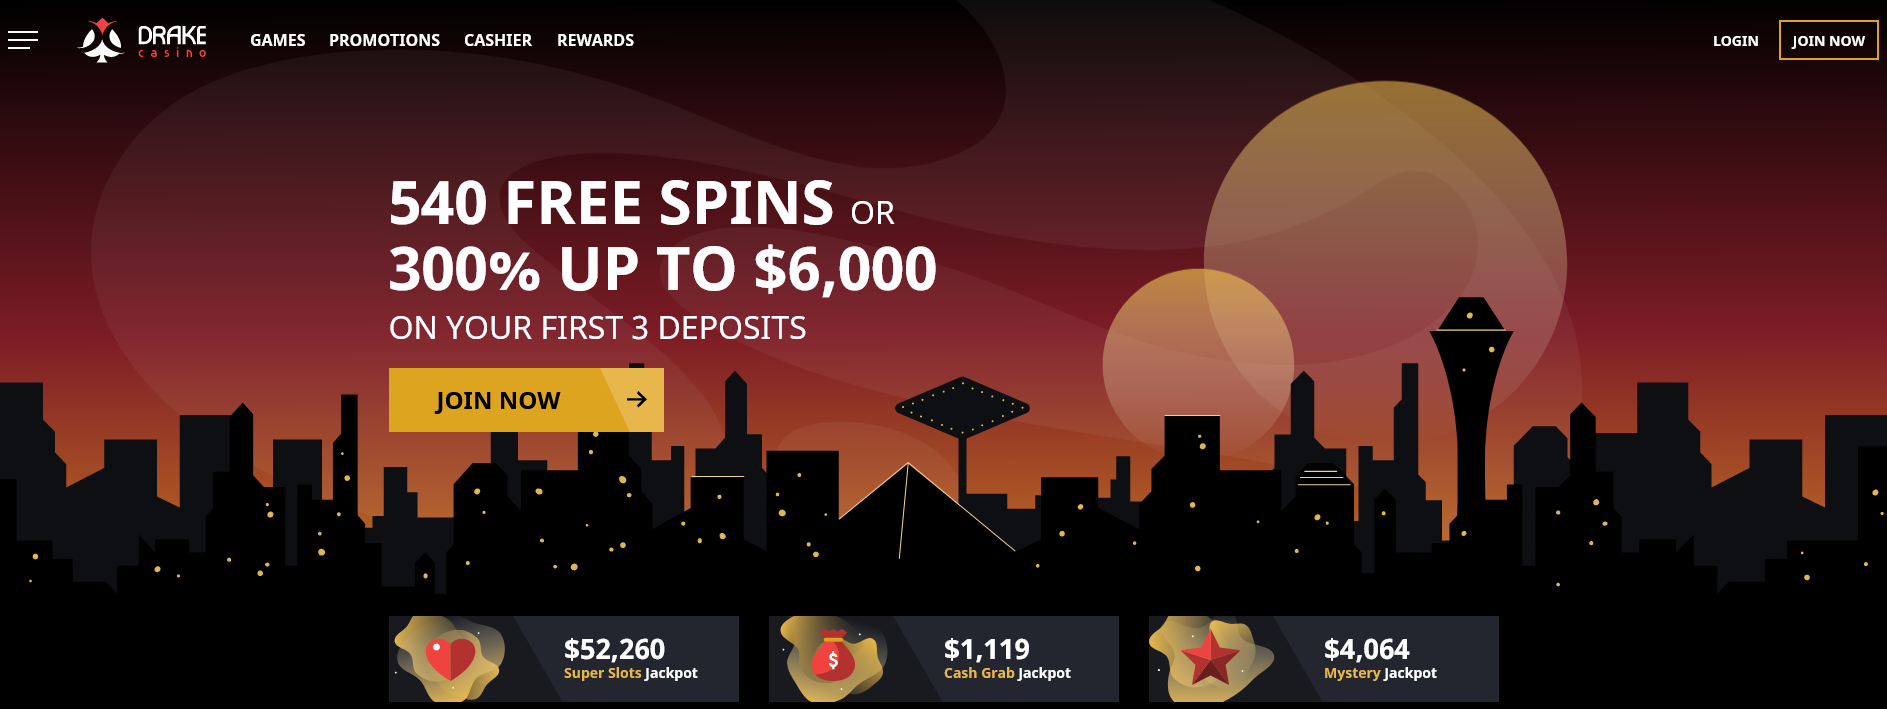 540 free
                                                          spins or 300%
                                                          up to $6,000
                                                          on your first
                                                          3 deposits